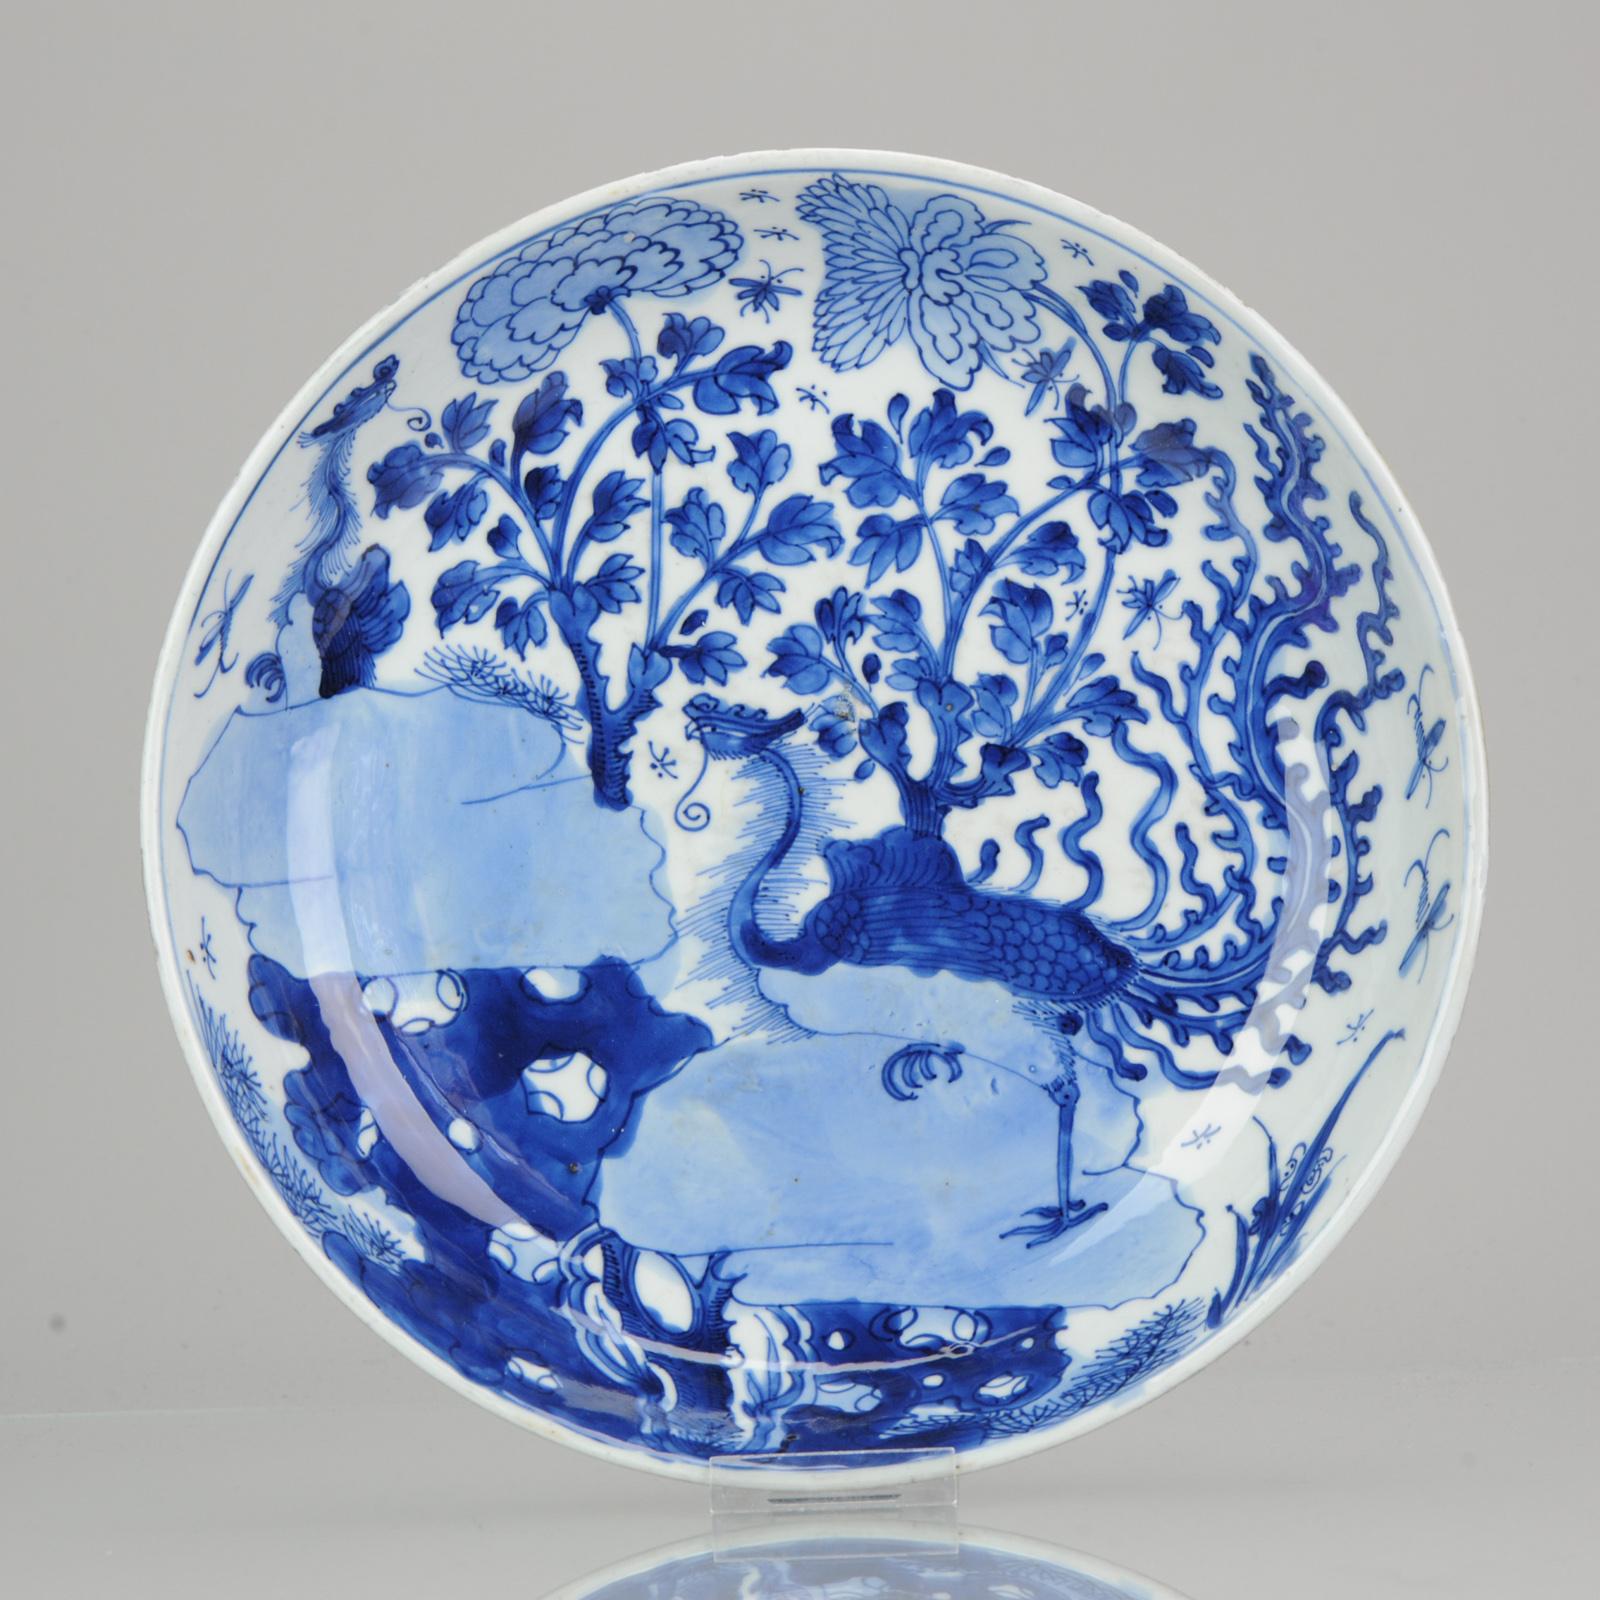 Large and very nice blue and white charger with a stunning landscape scene to get lost in. Central is a large Phoenix bird with beautiful large tail standing on a rock. Left above another phoenix is visible peaking over a rock. Further blossoming